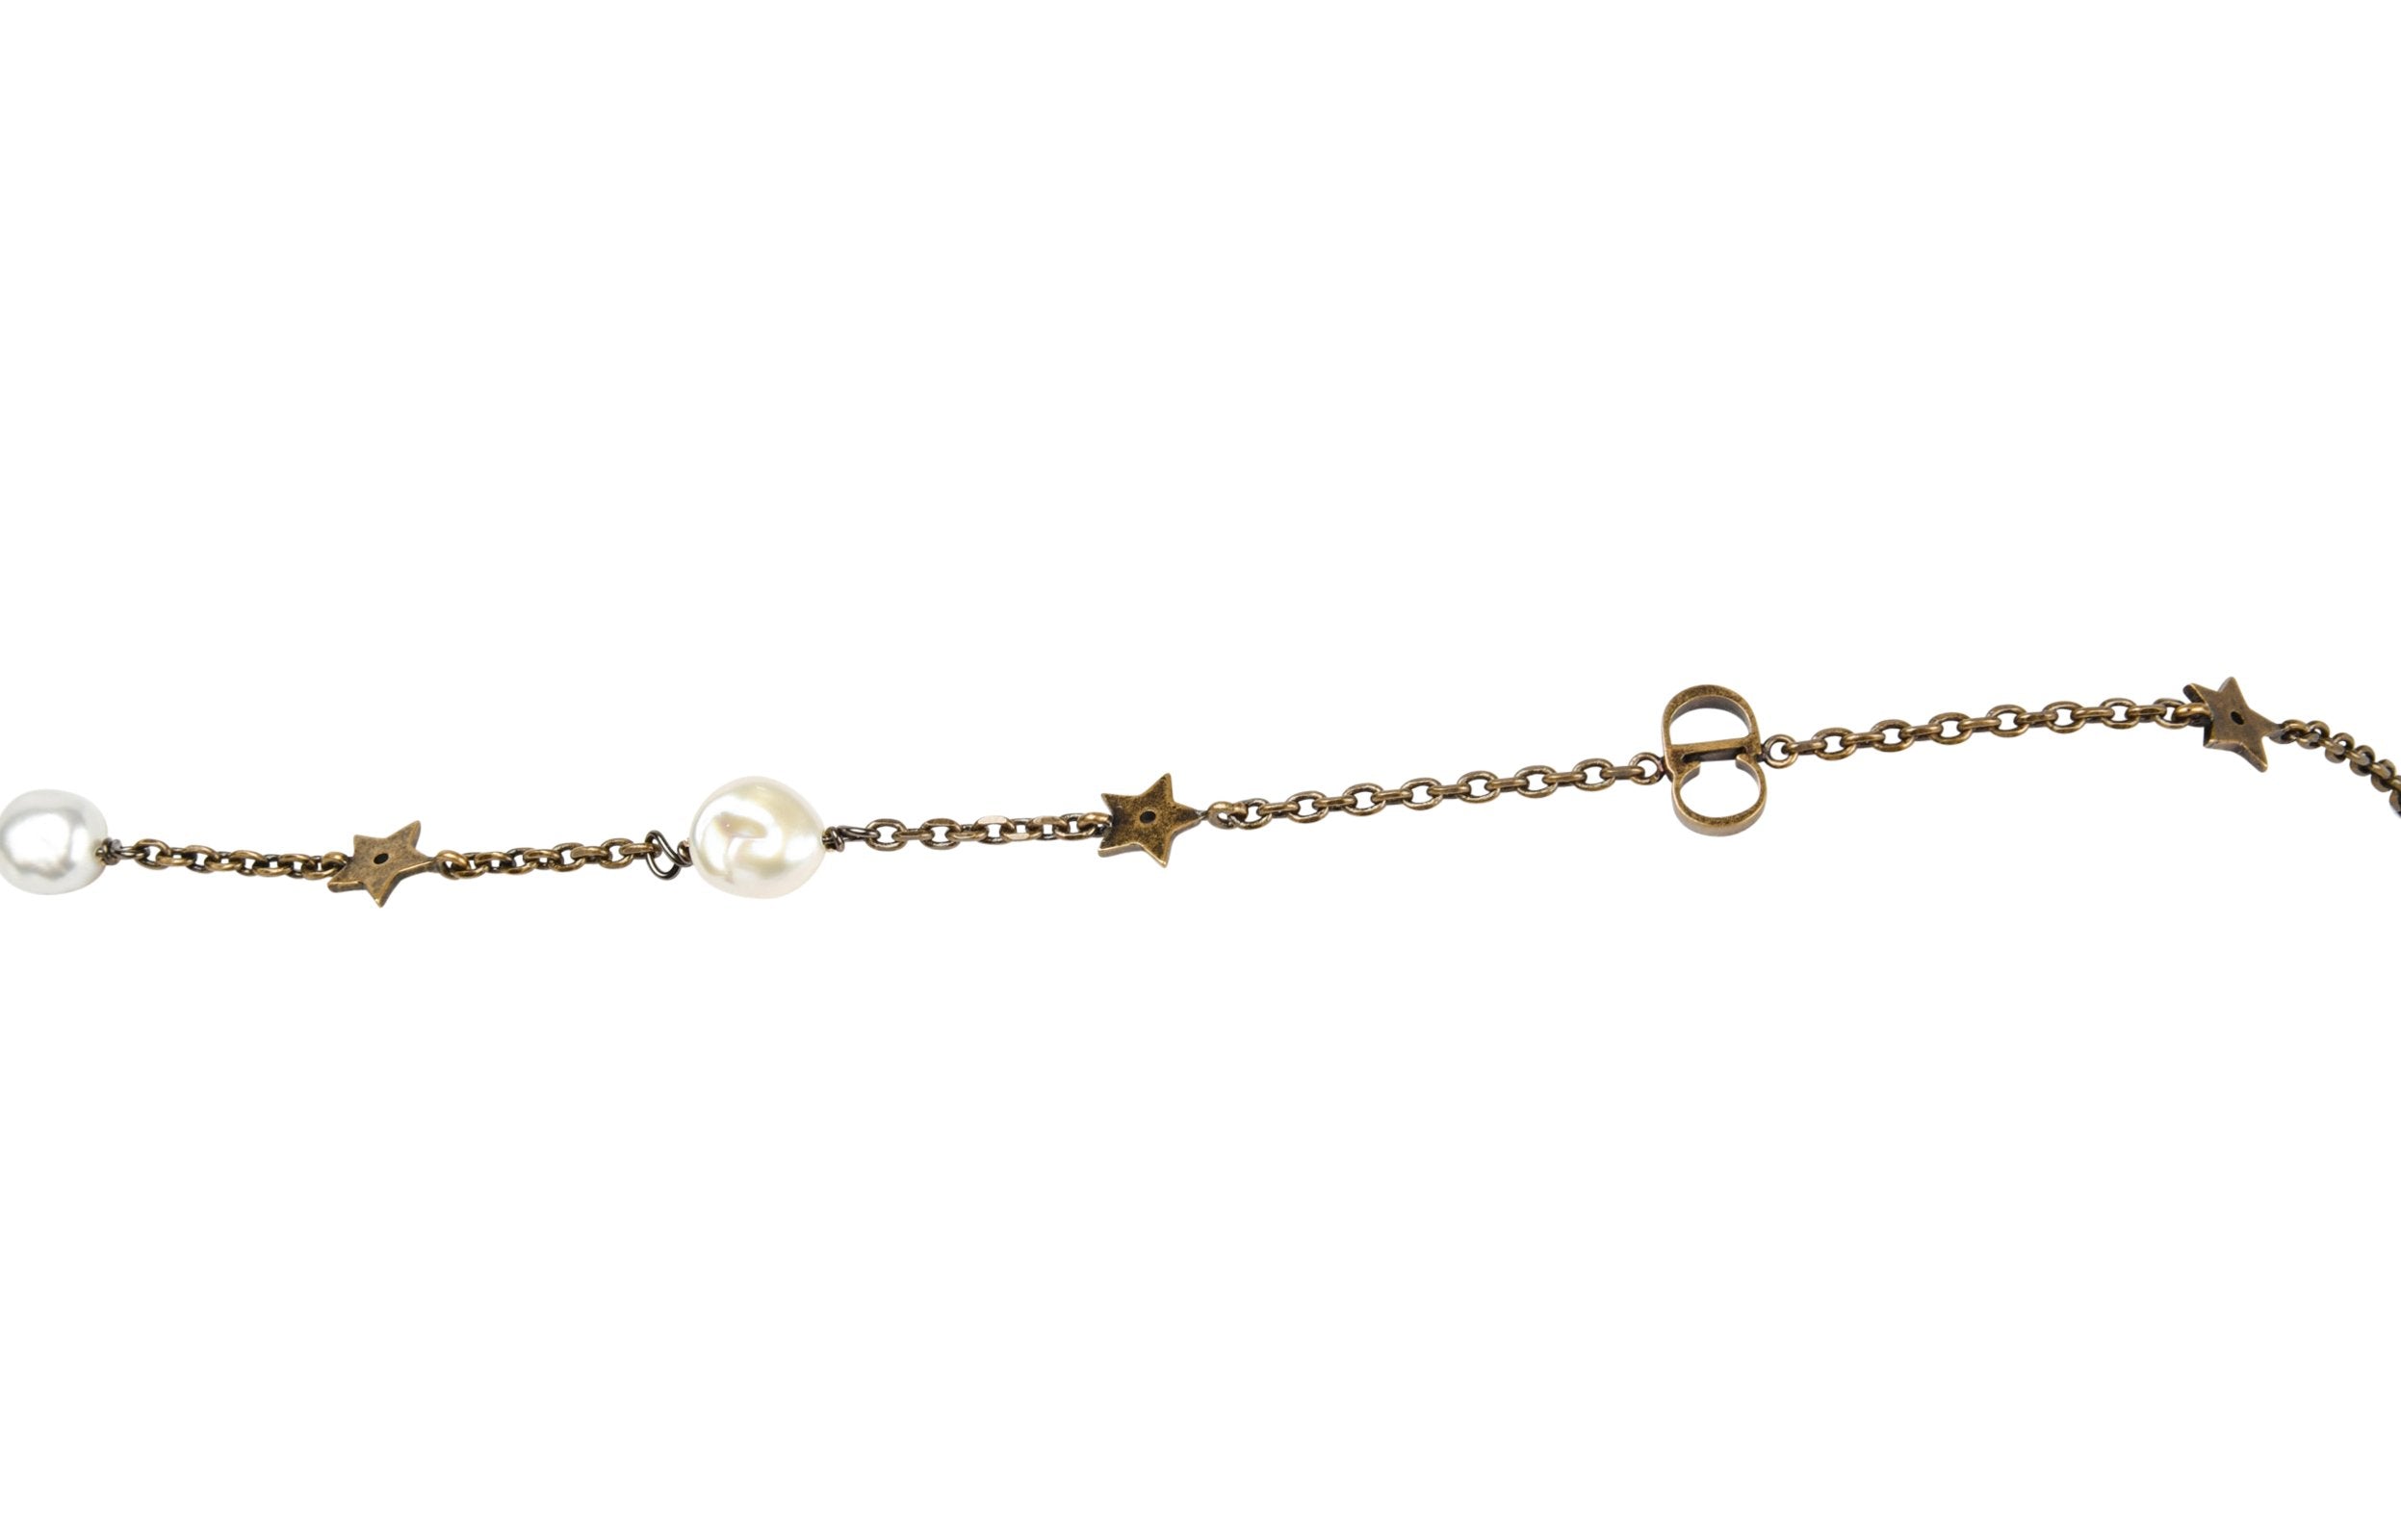 Christian Dior Dior Dior Pearl Necklace Charm Bee Star Clover